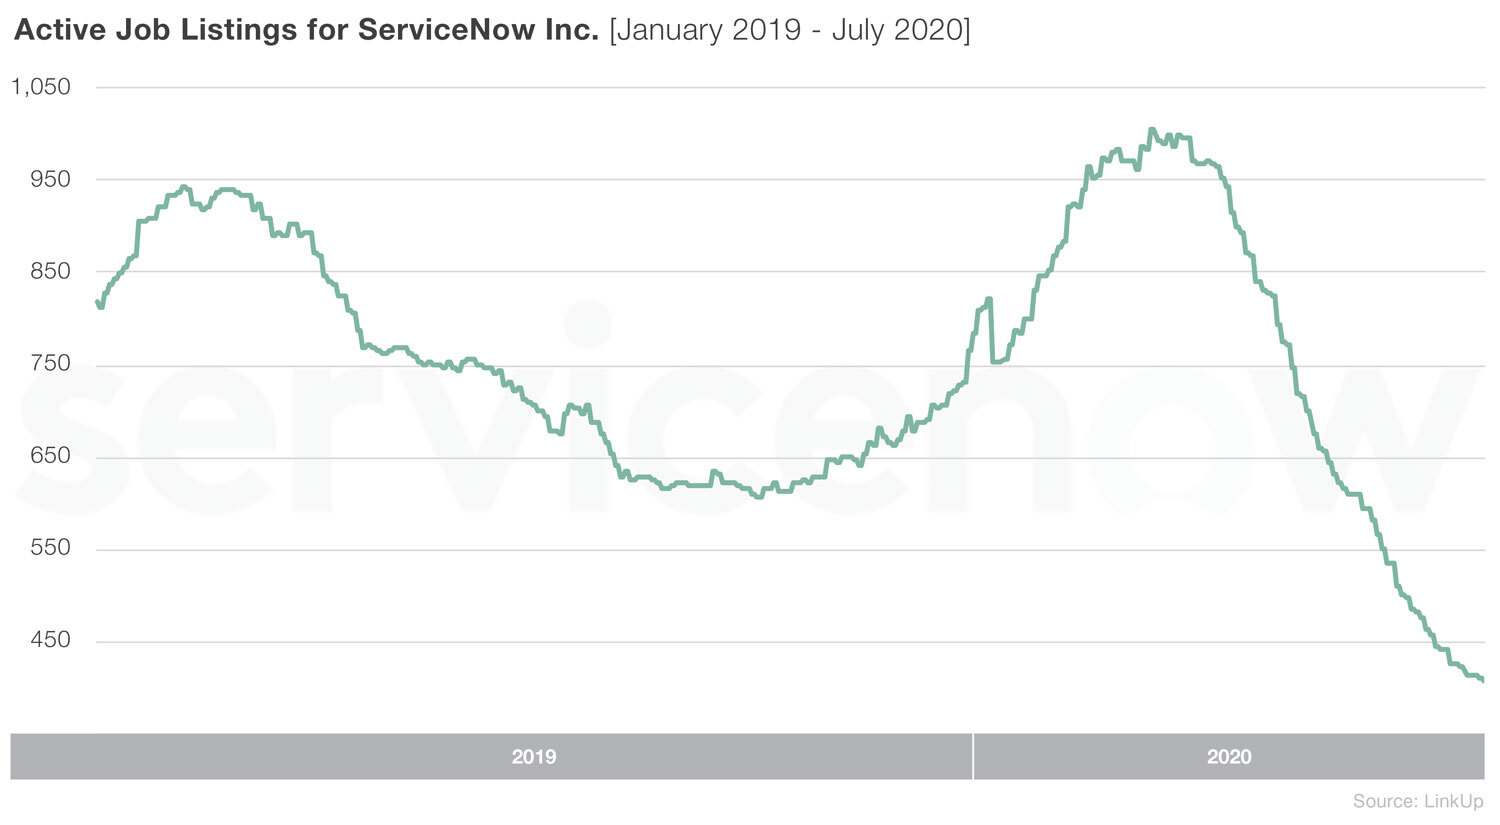 Active Job Listings for ServiceNow Inc. 2019 to 2020